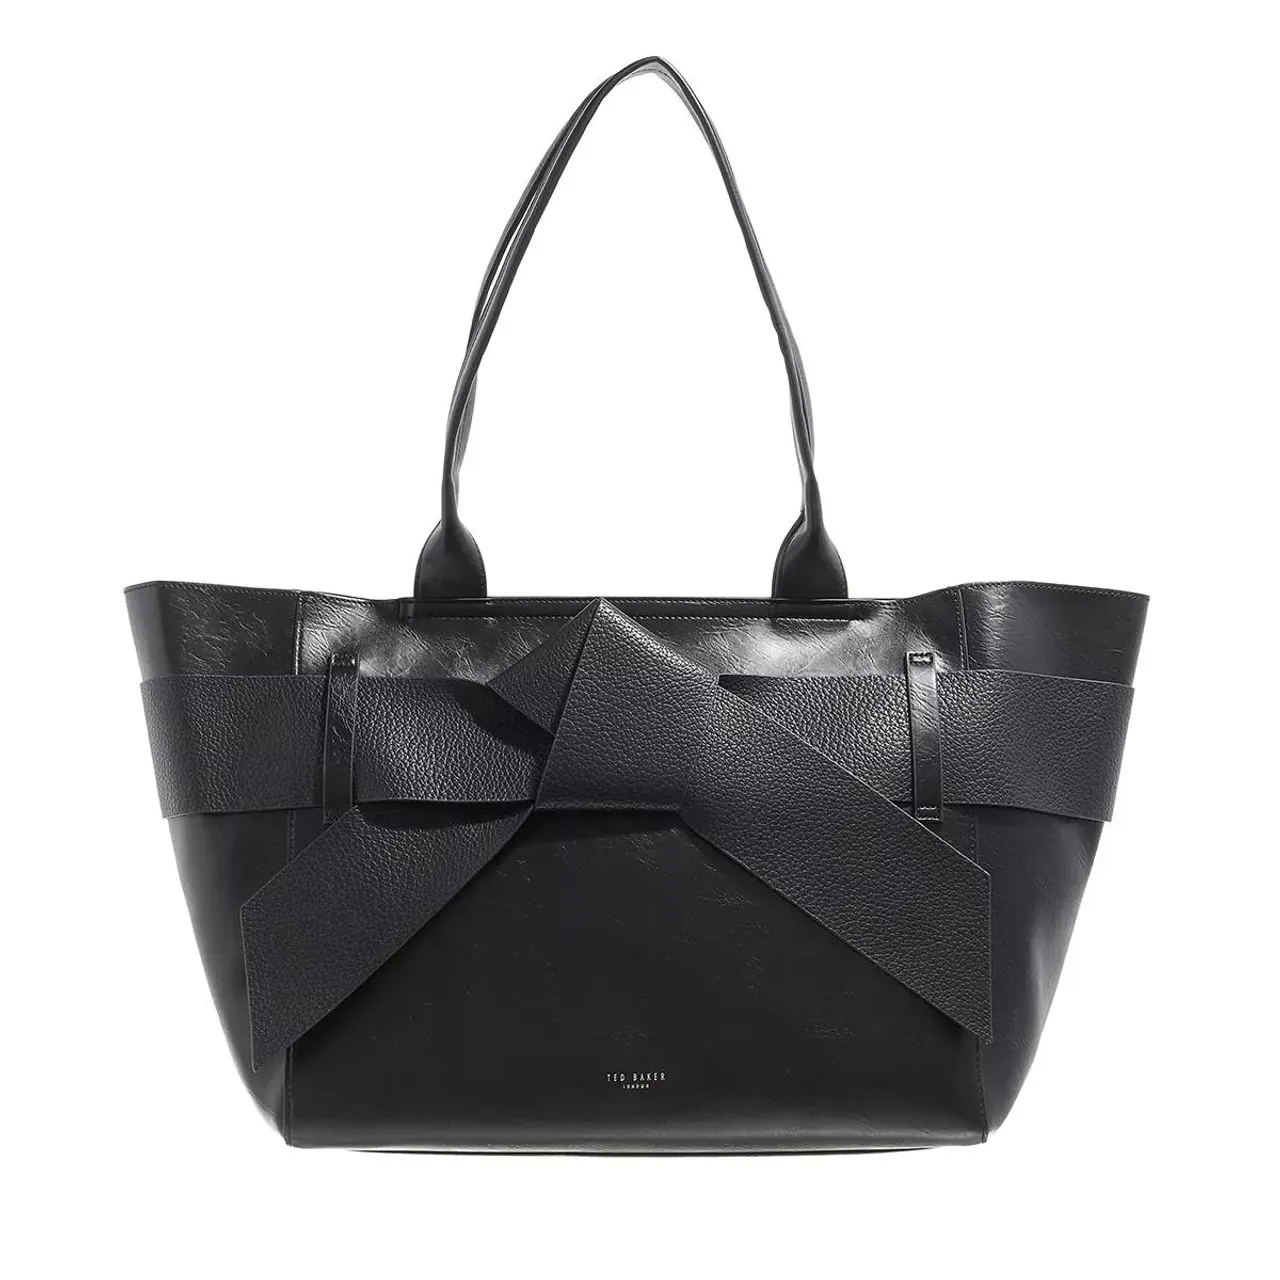 Ted Baker Shopping Bags - PU Large Tote - black - Shopping Bags for ladies